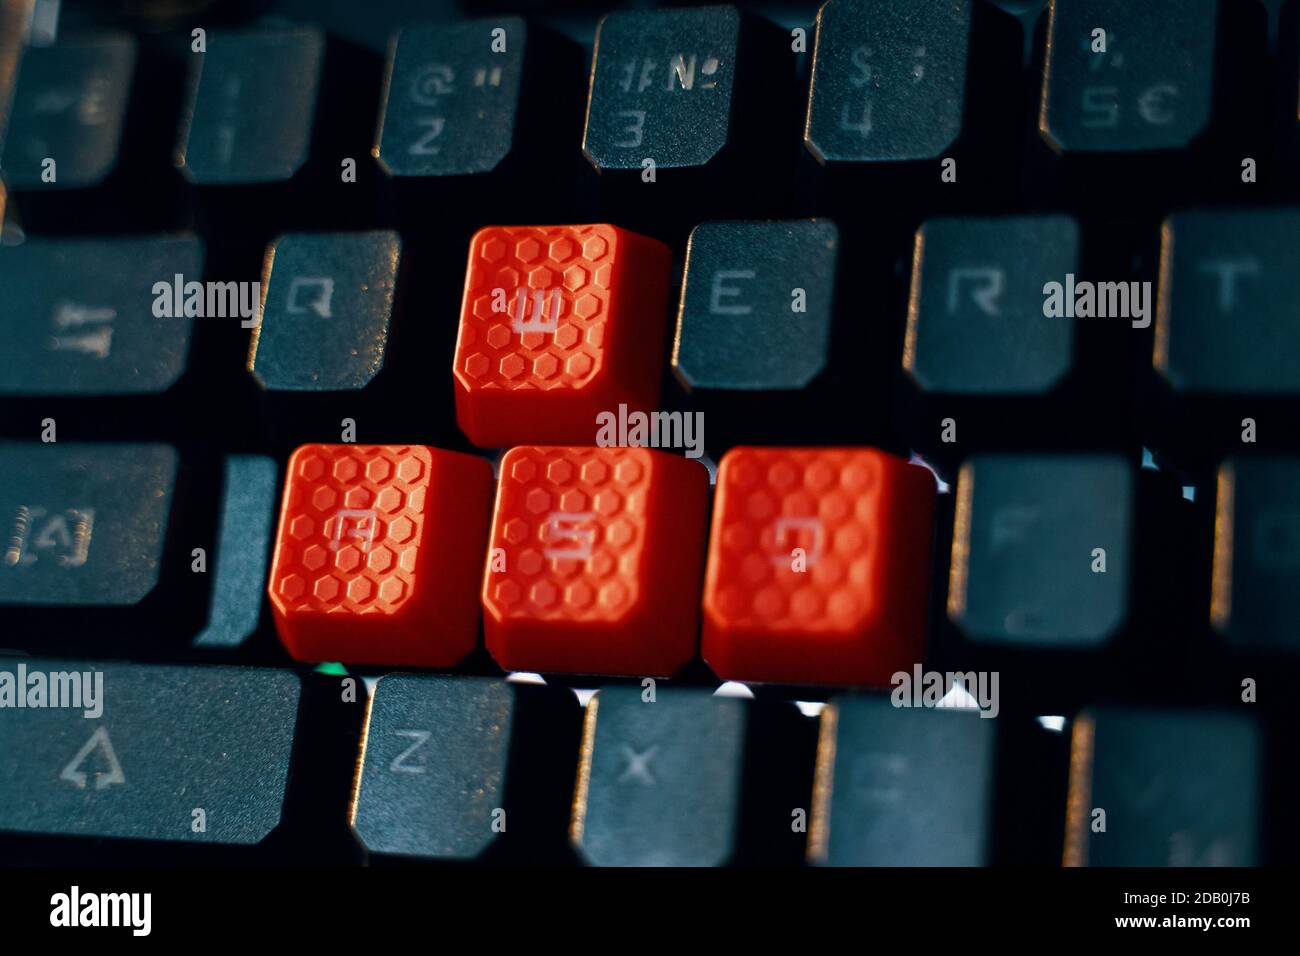 Gaming Keyboard. WASD keys are used in many video games. Multifunction  Keyboard with Set of Red Keys Stock Photo - Alamy